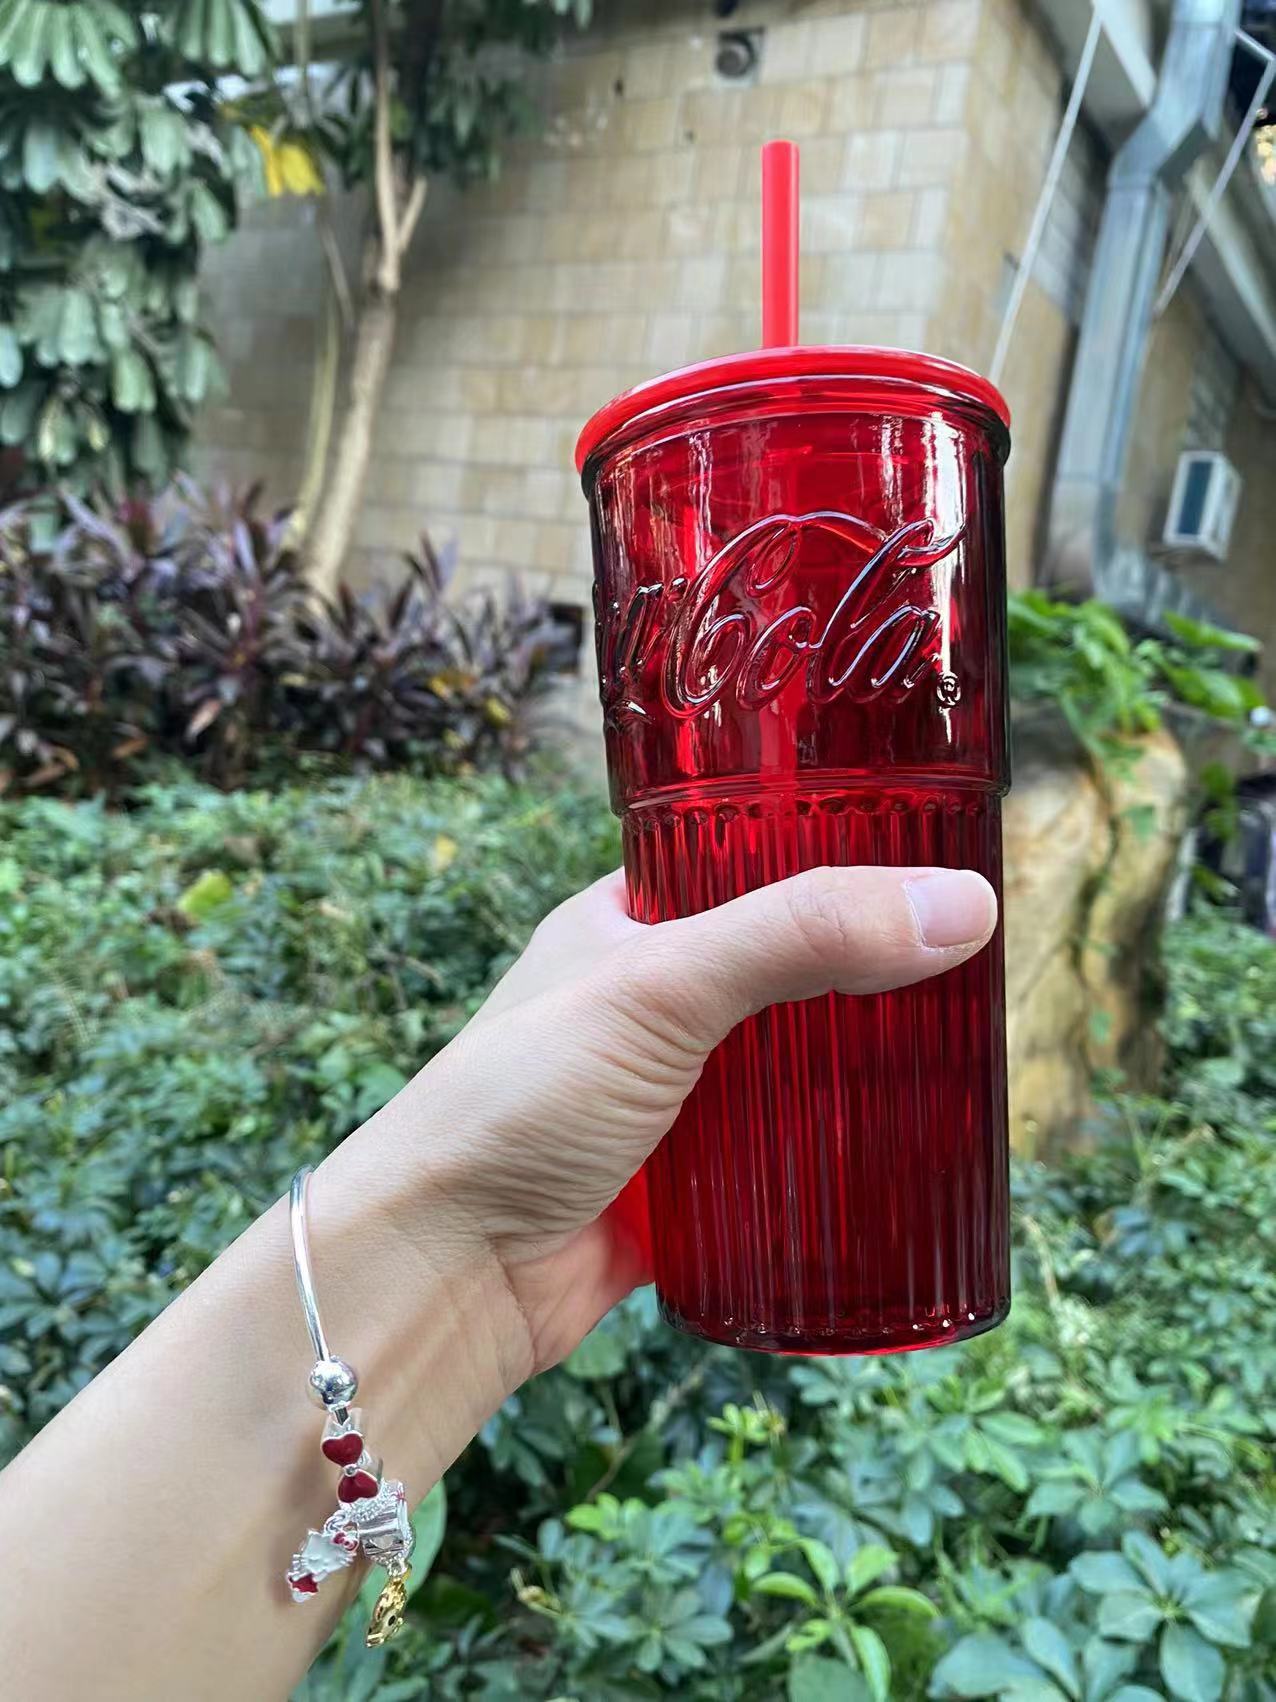 Tea_Haven on Instagram: 600ml Coca Cola glass cup with straw N10,780